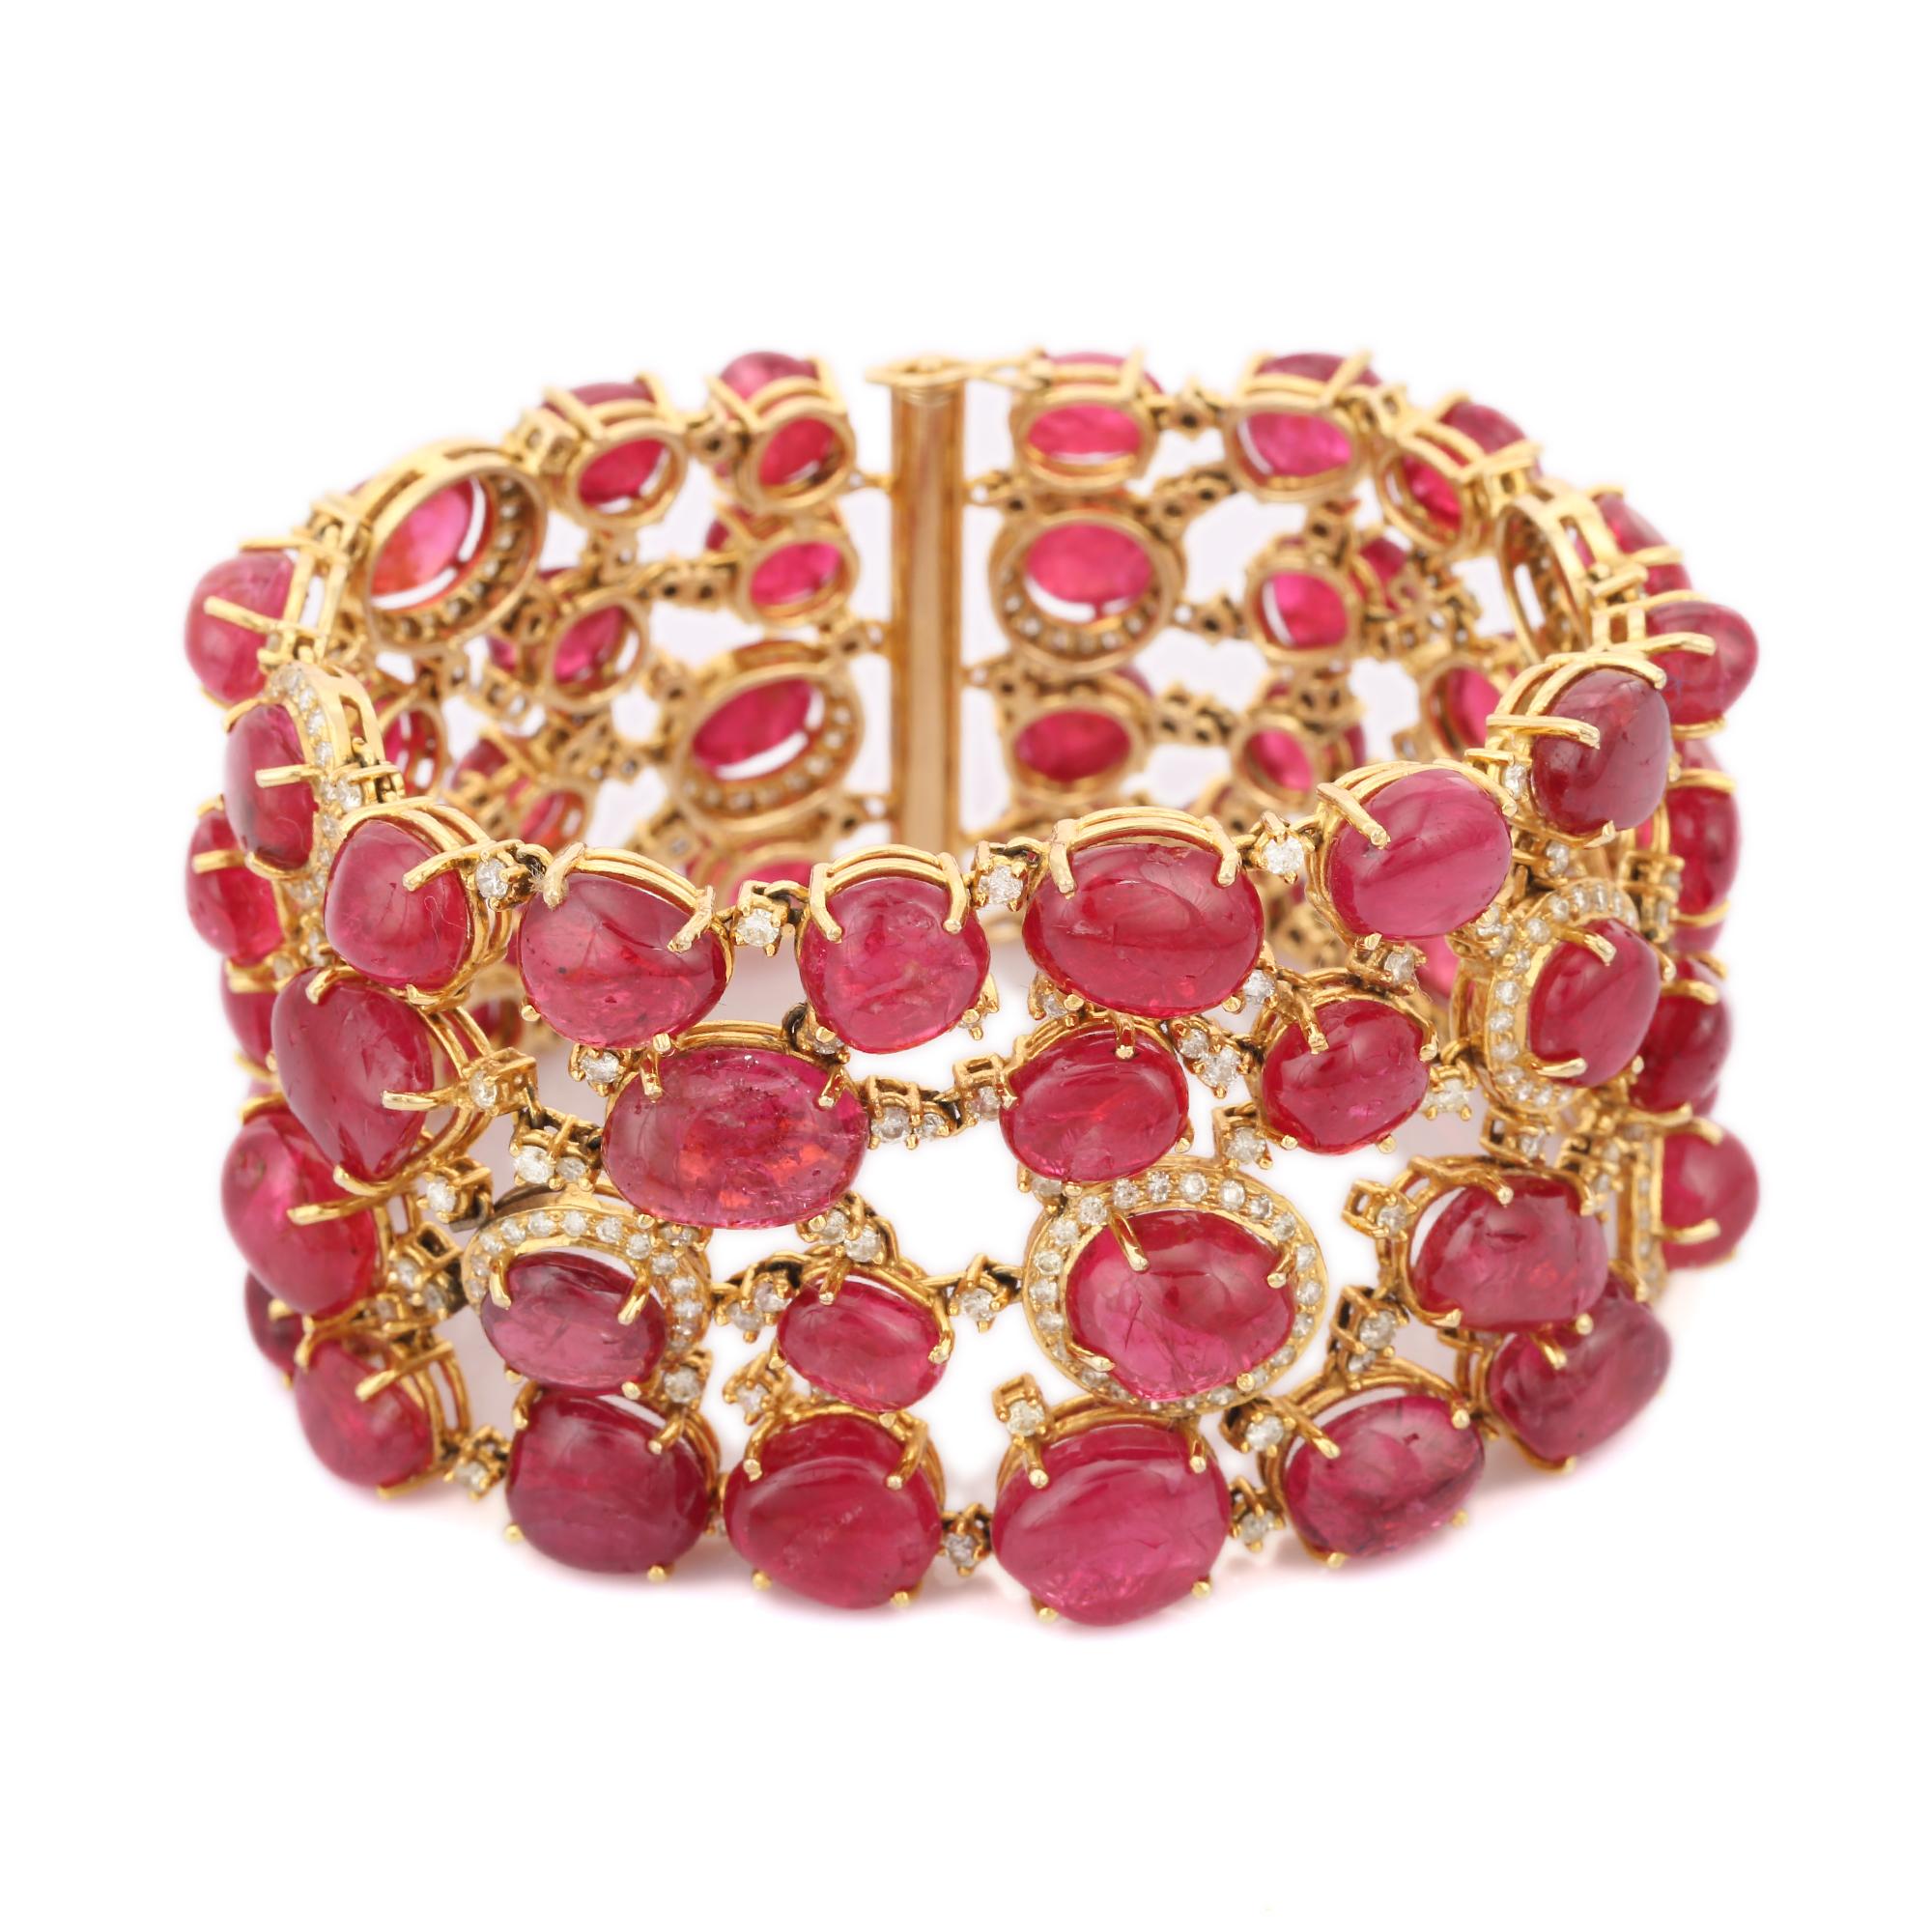 Contemporary 18kt Solid Yellow Gold 207.68 Carat TW Ruby Bracelet with 7.72 CTW Diamonds For Sale